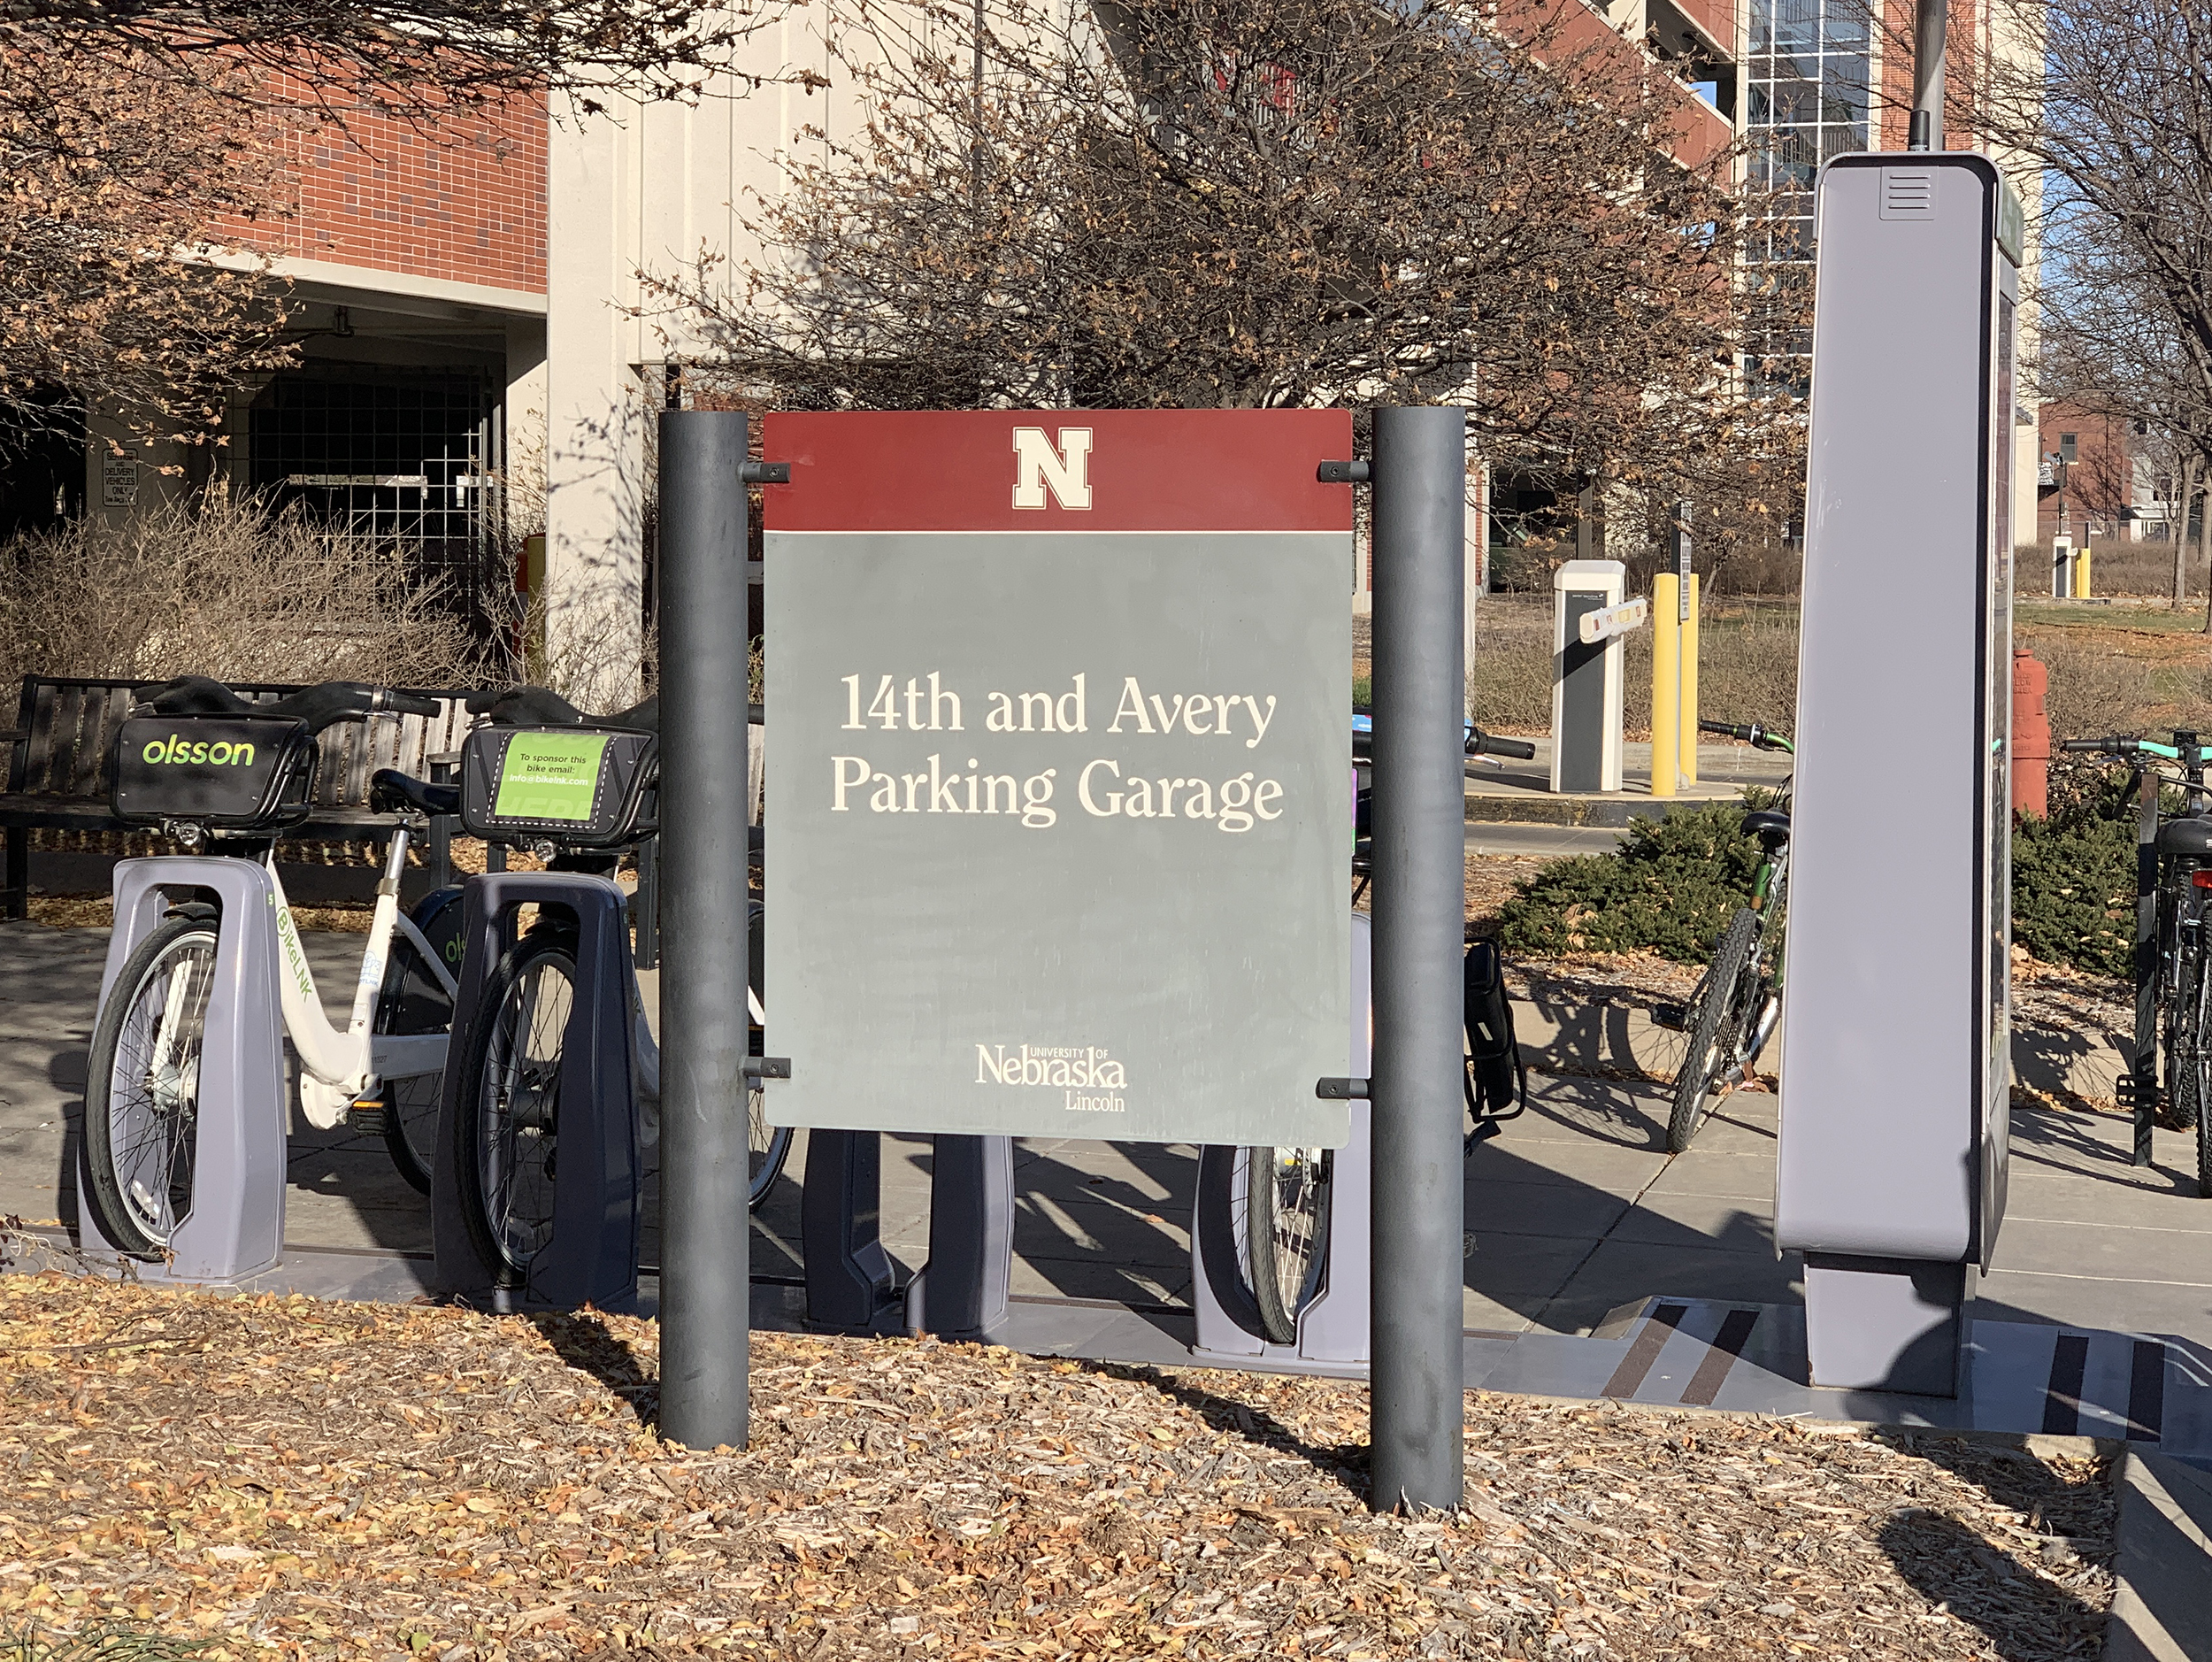 14th and Avery Parking Garage is located north of the Campus Rec Center and west of Harper, Schramm, and Smith residence halls.